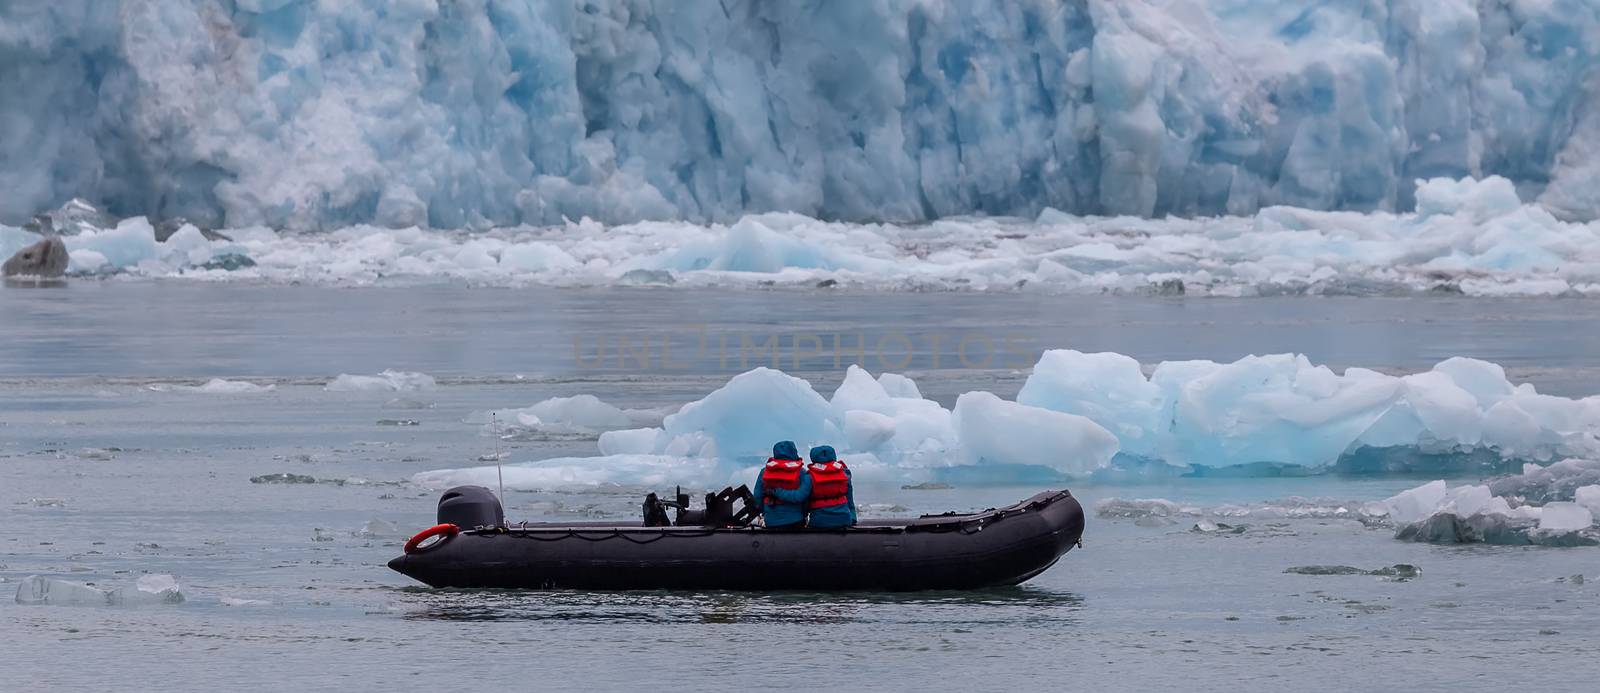 Two people sitting close to each other and wearing life jackets on a boat next to the glacier, icebergs floating around.